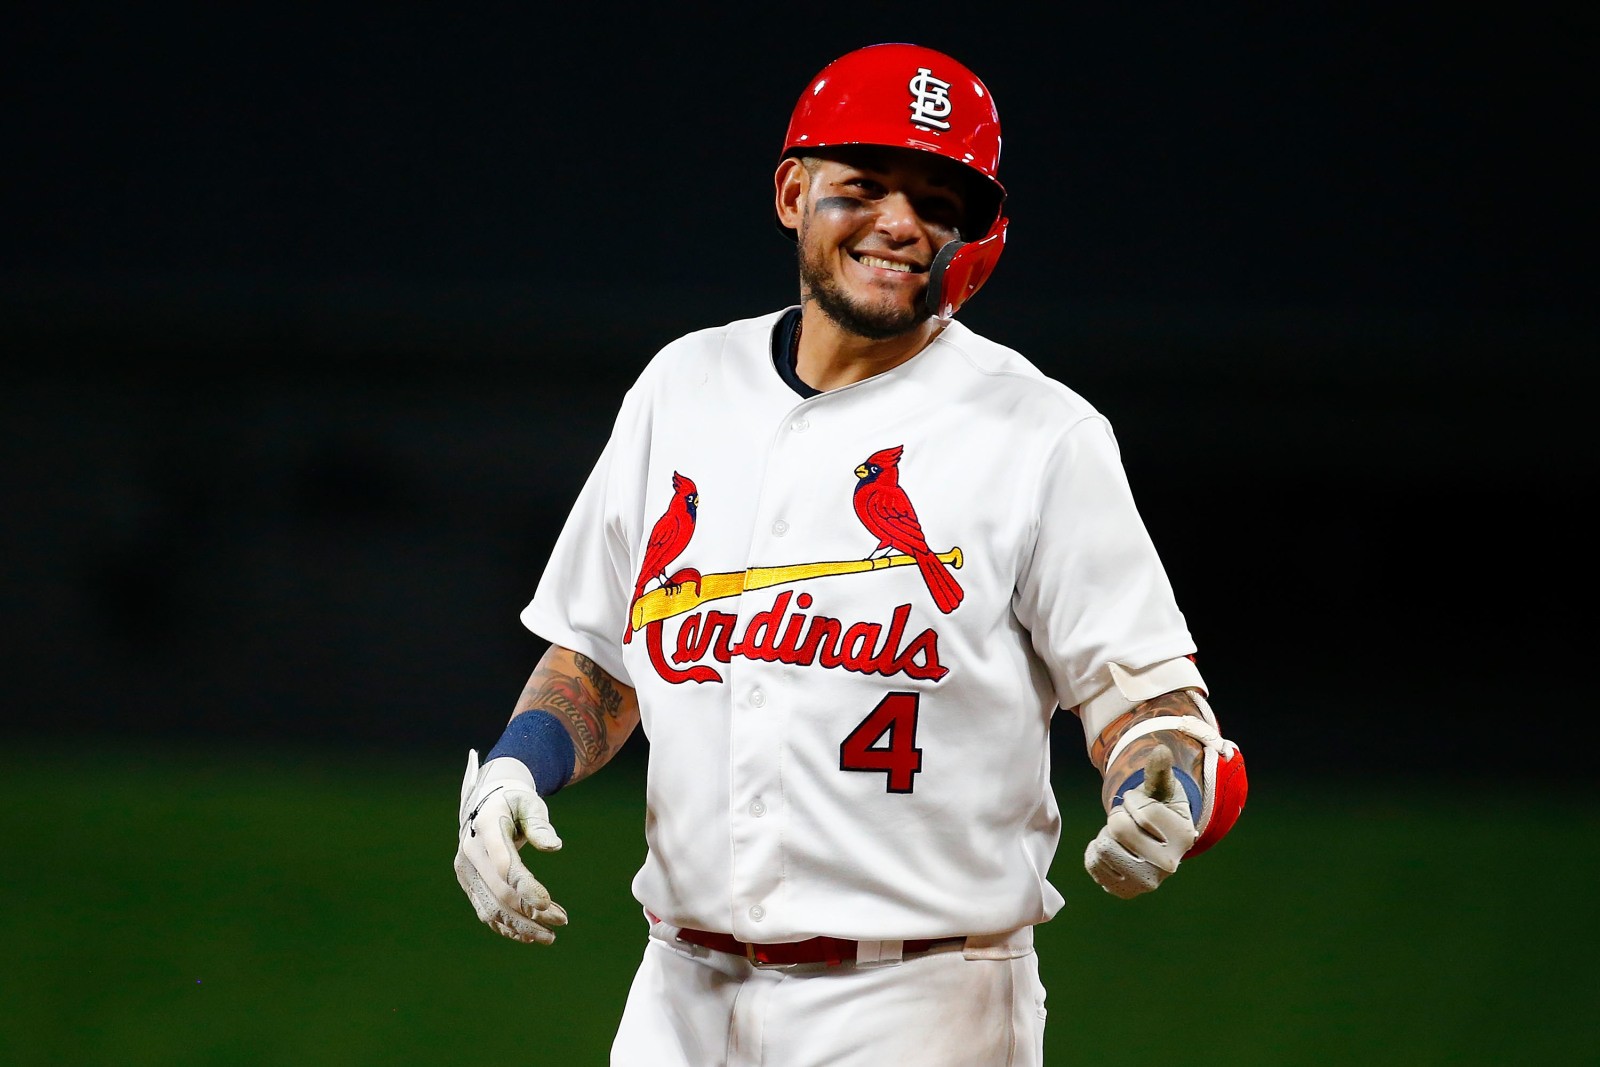 Could these be their last games as a St. Louis Cardinals player?